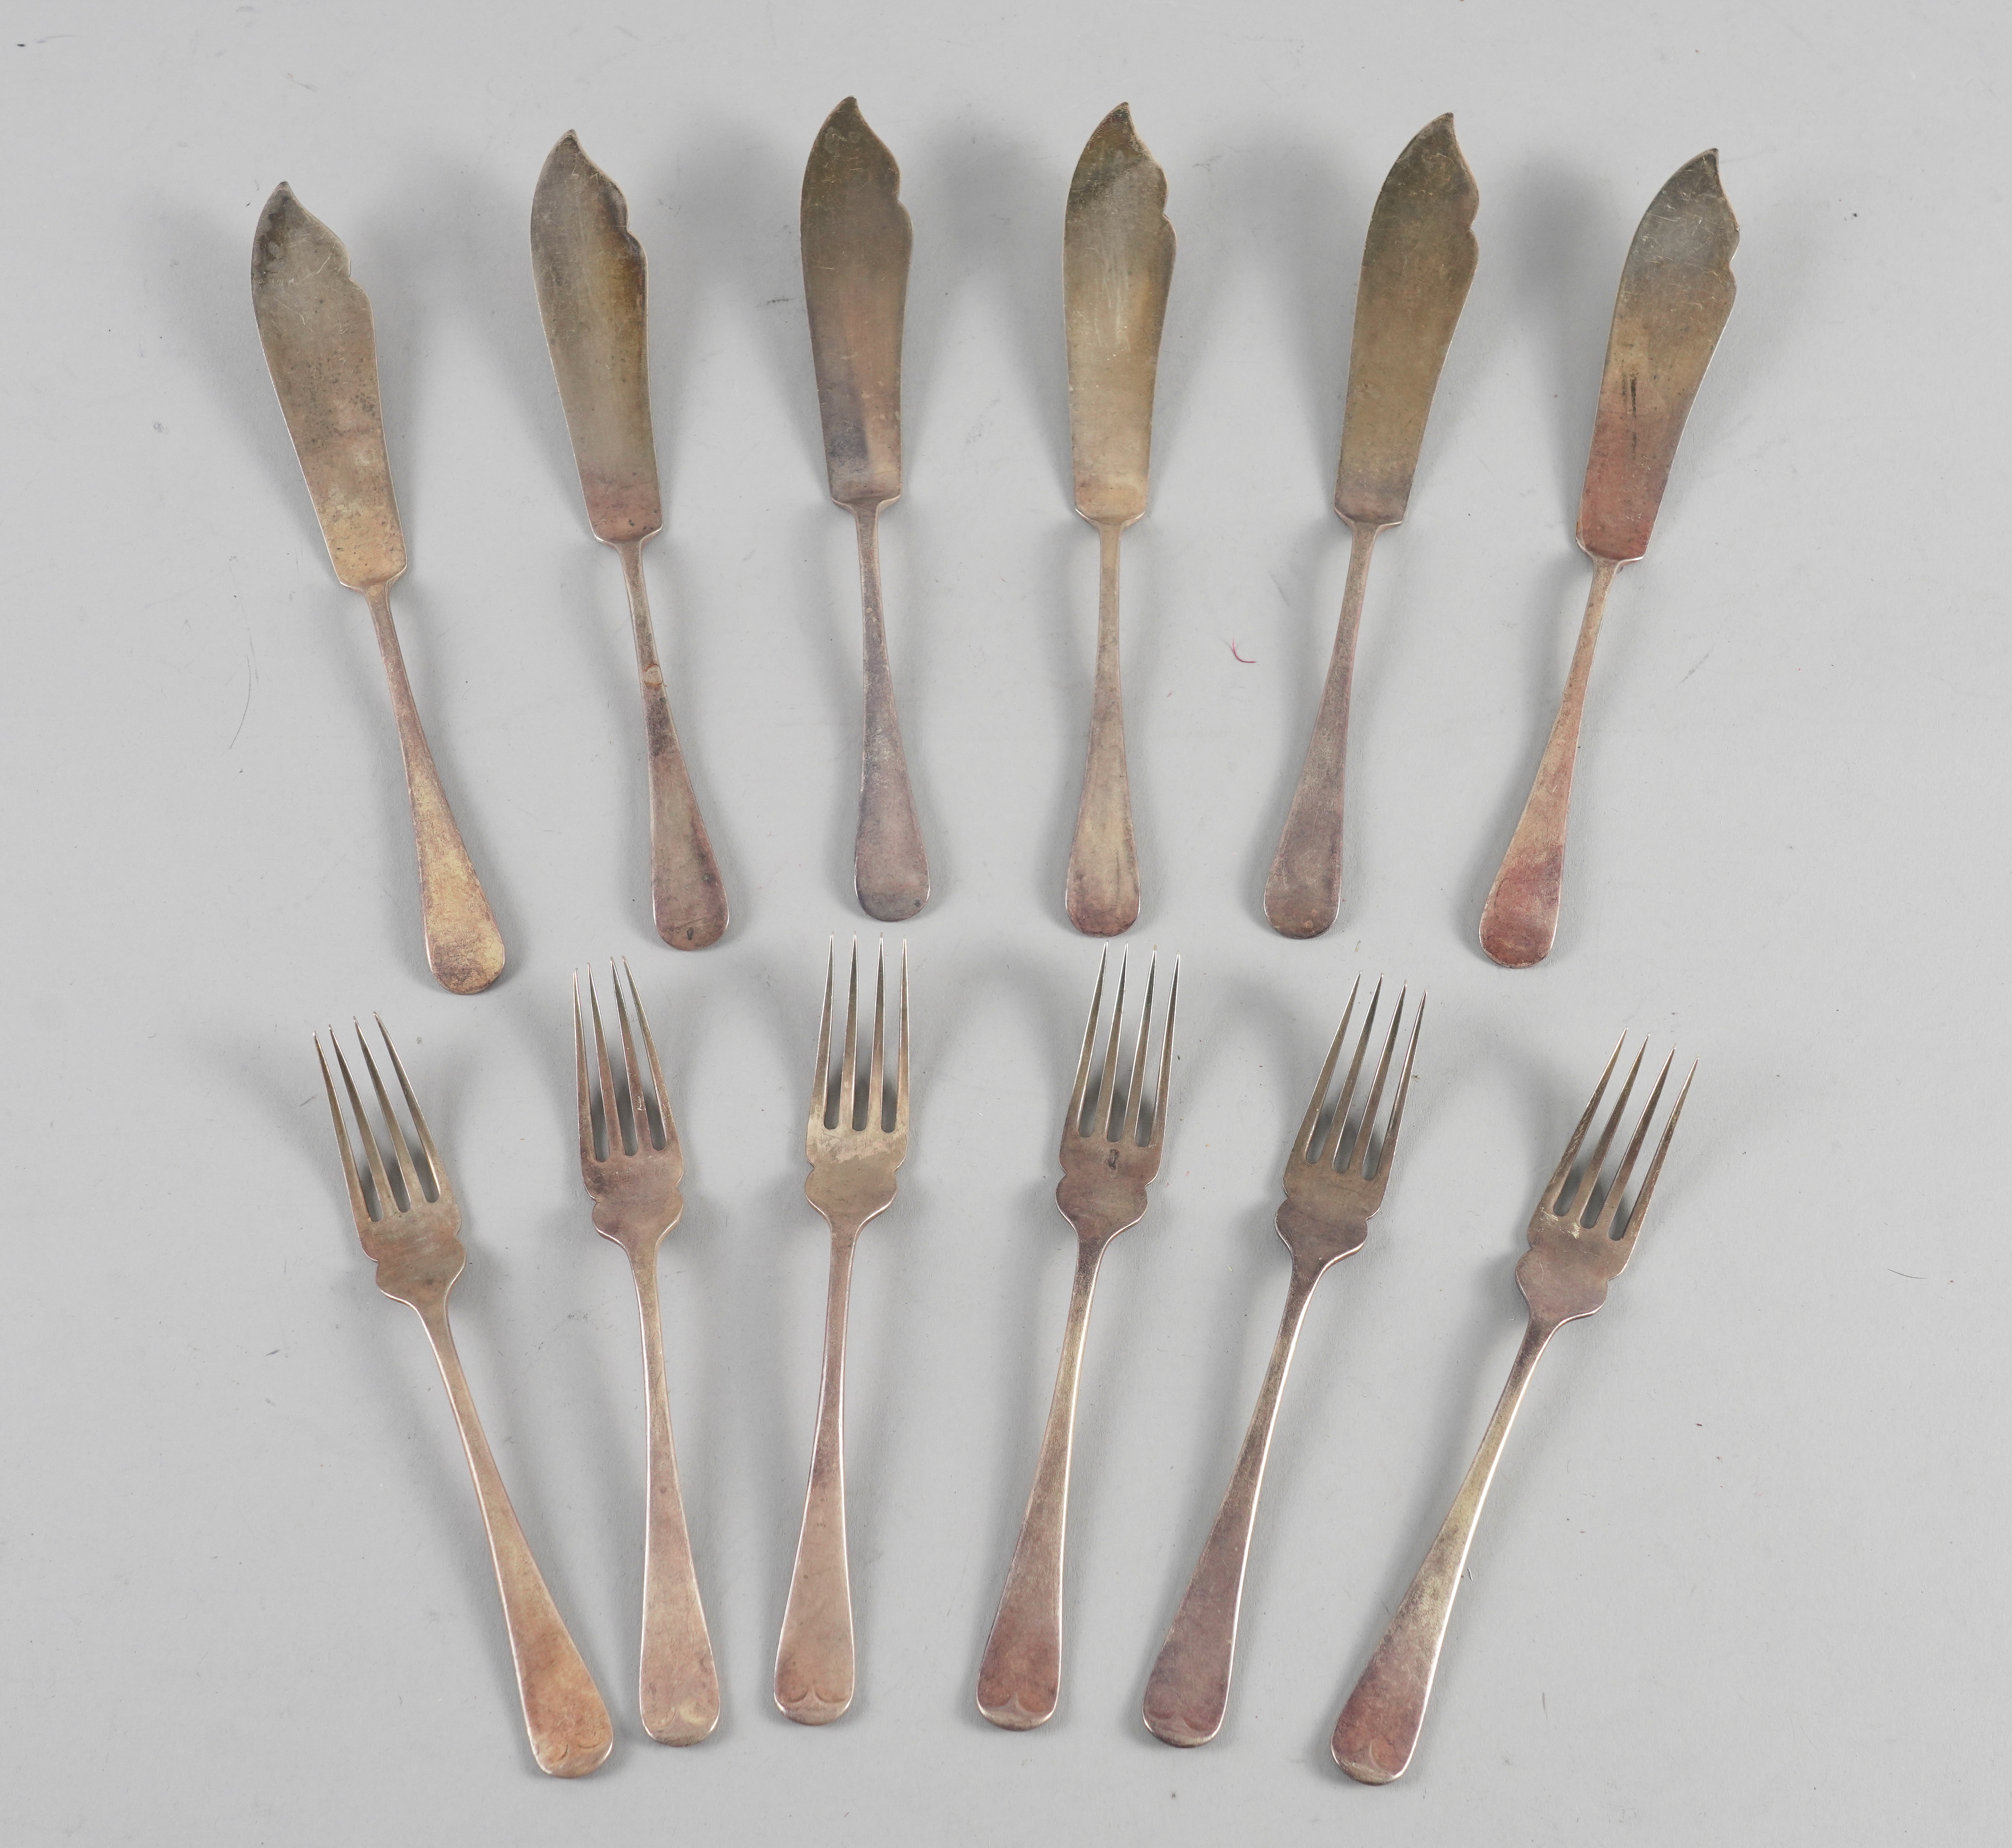 SIX PAIRS OF SILVER FISH KNIVES AND FORKS (12)